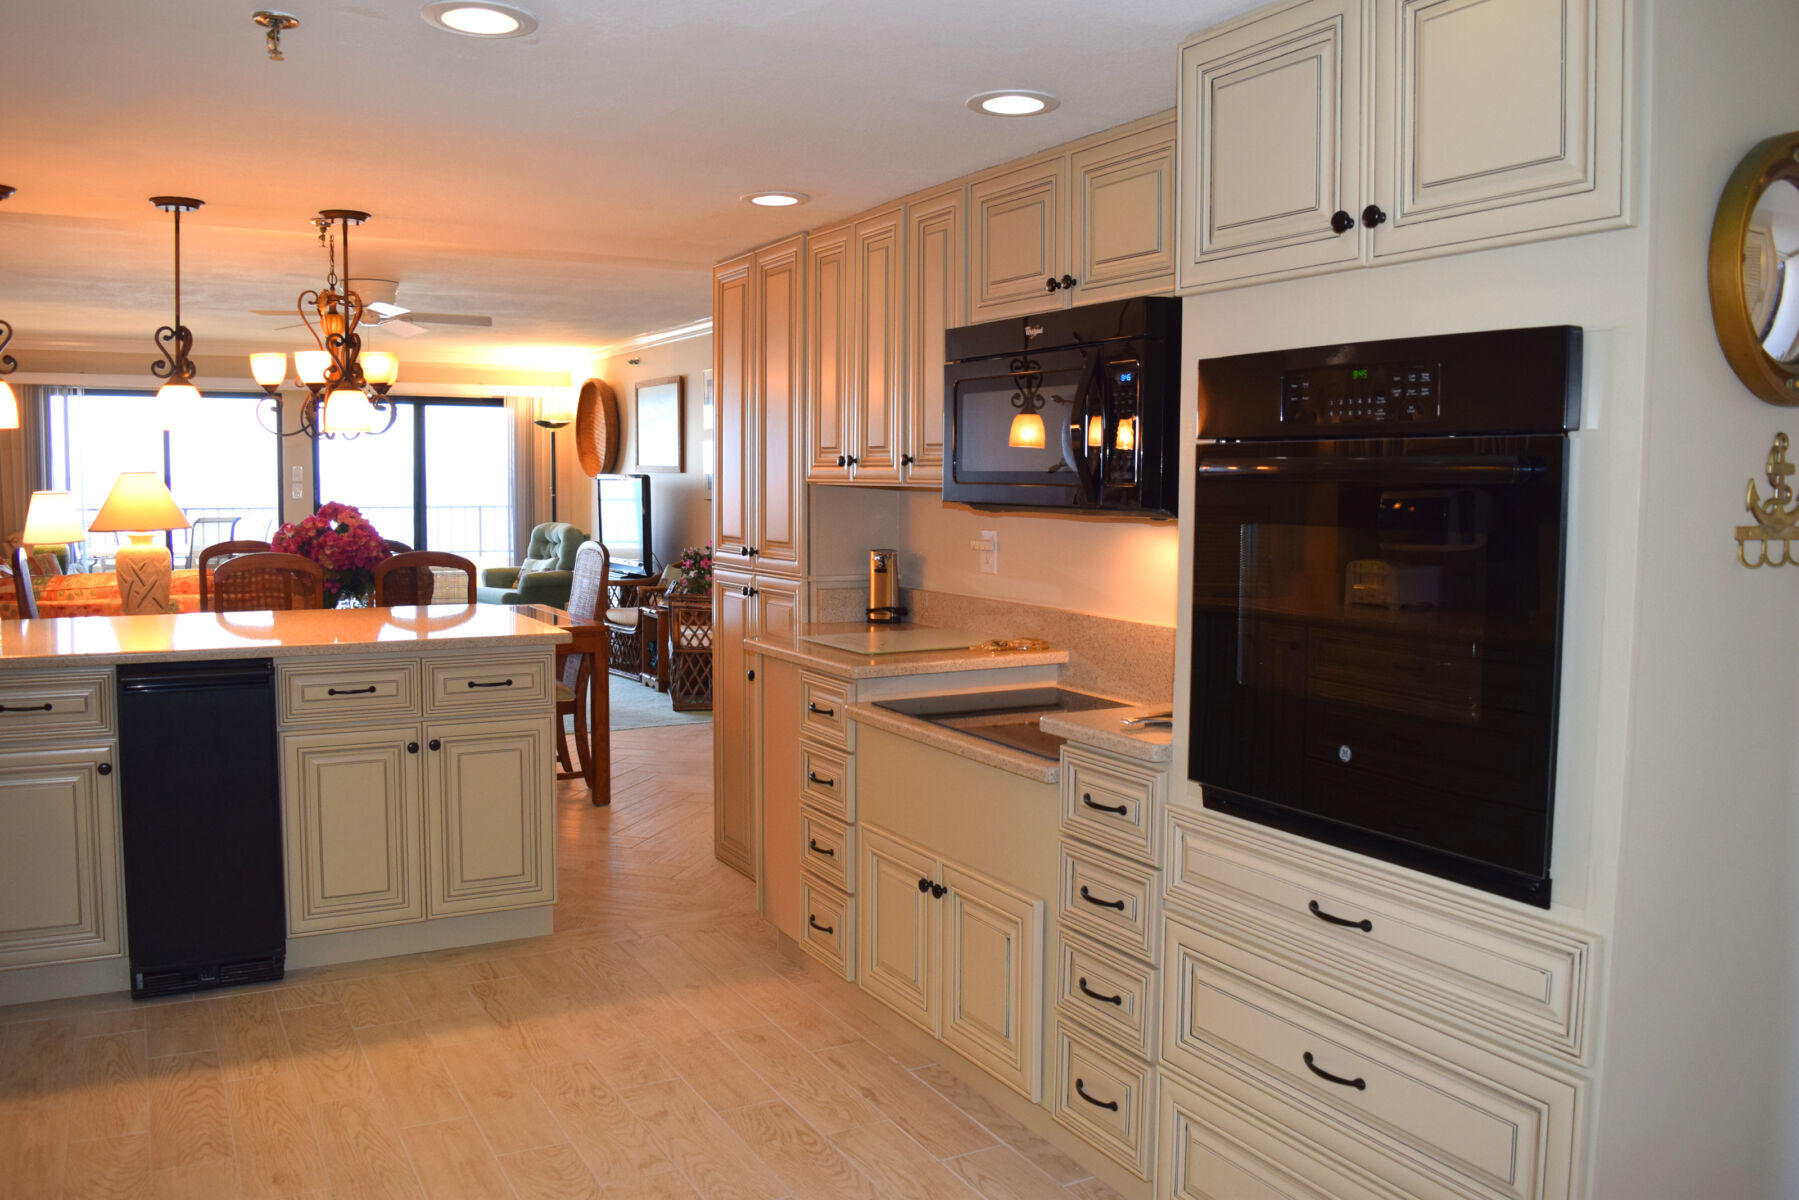 interior of vacation rental property, highlighting a fully furnished kitchen